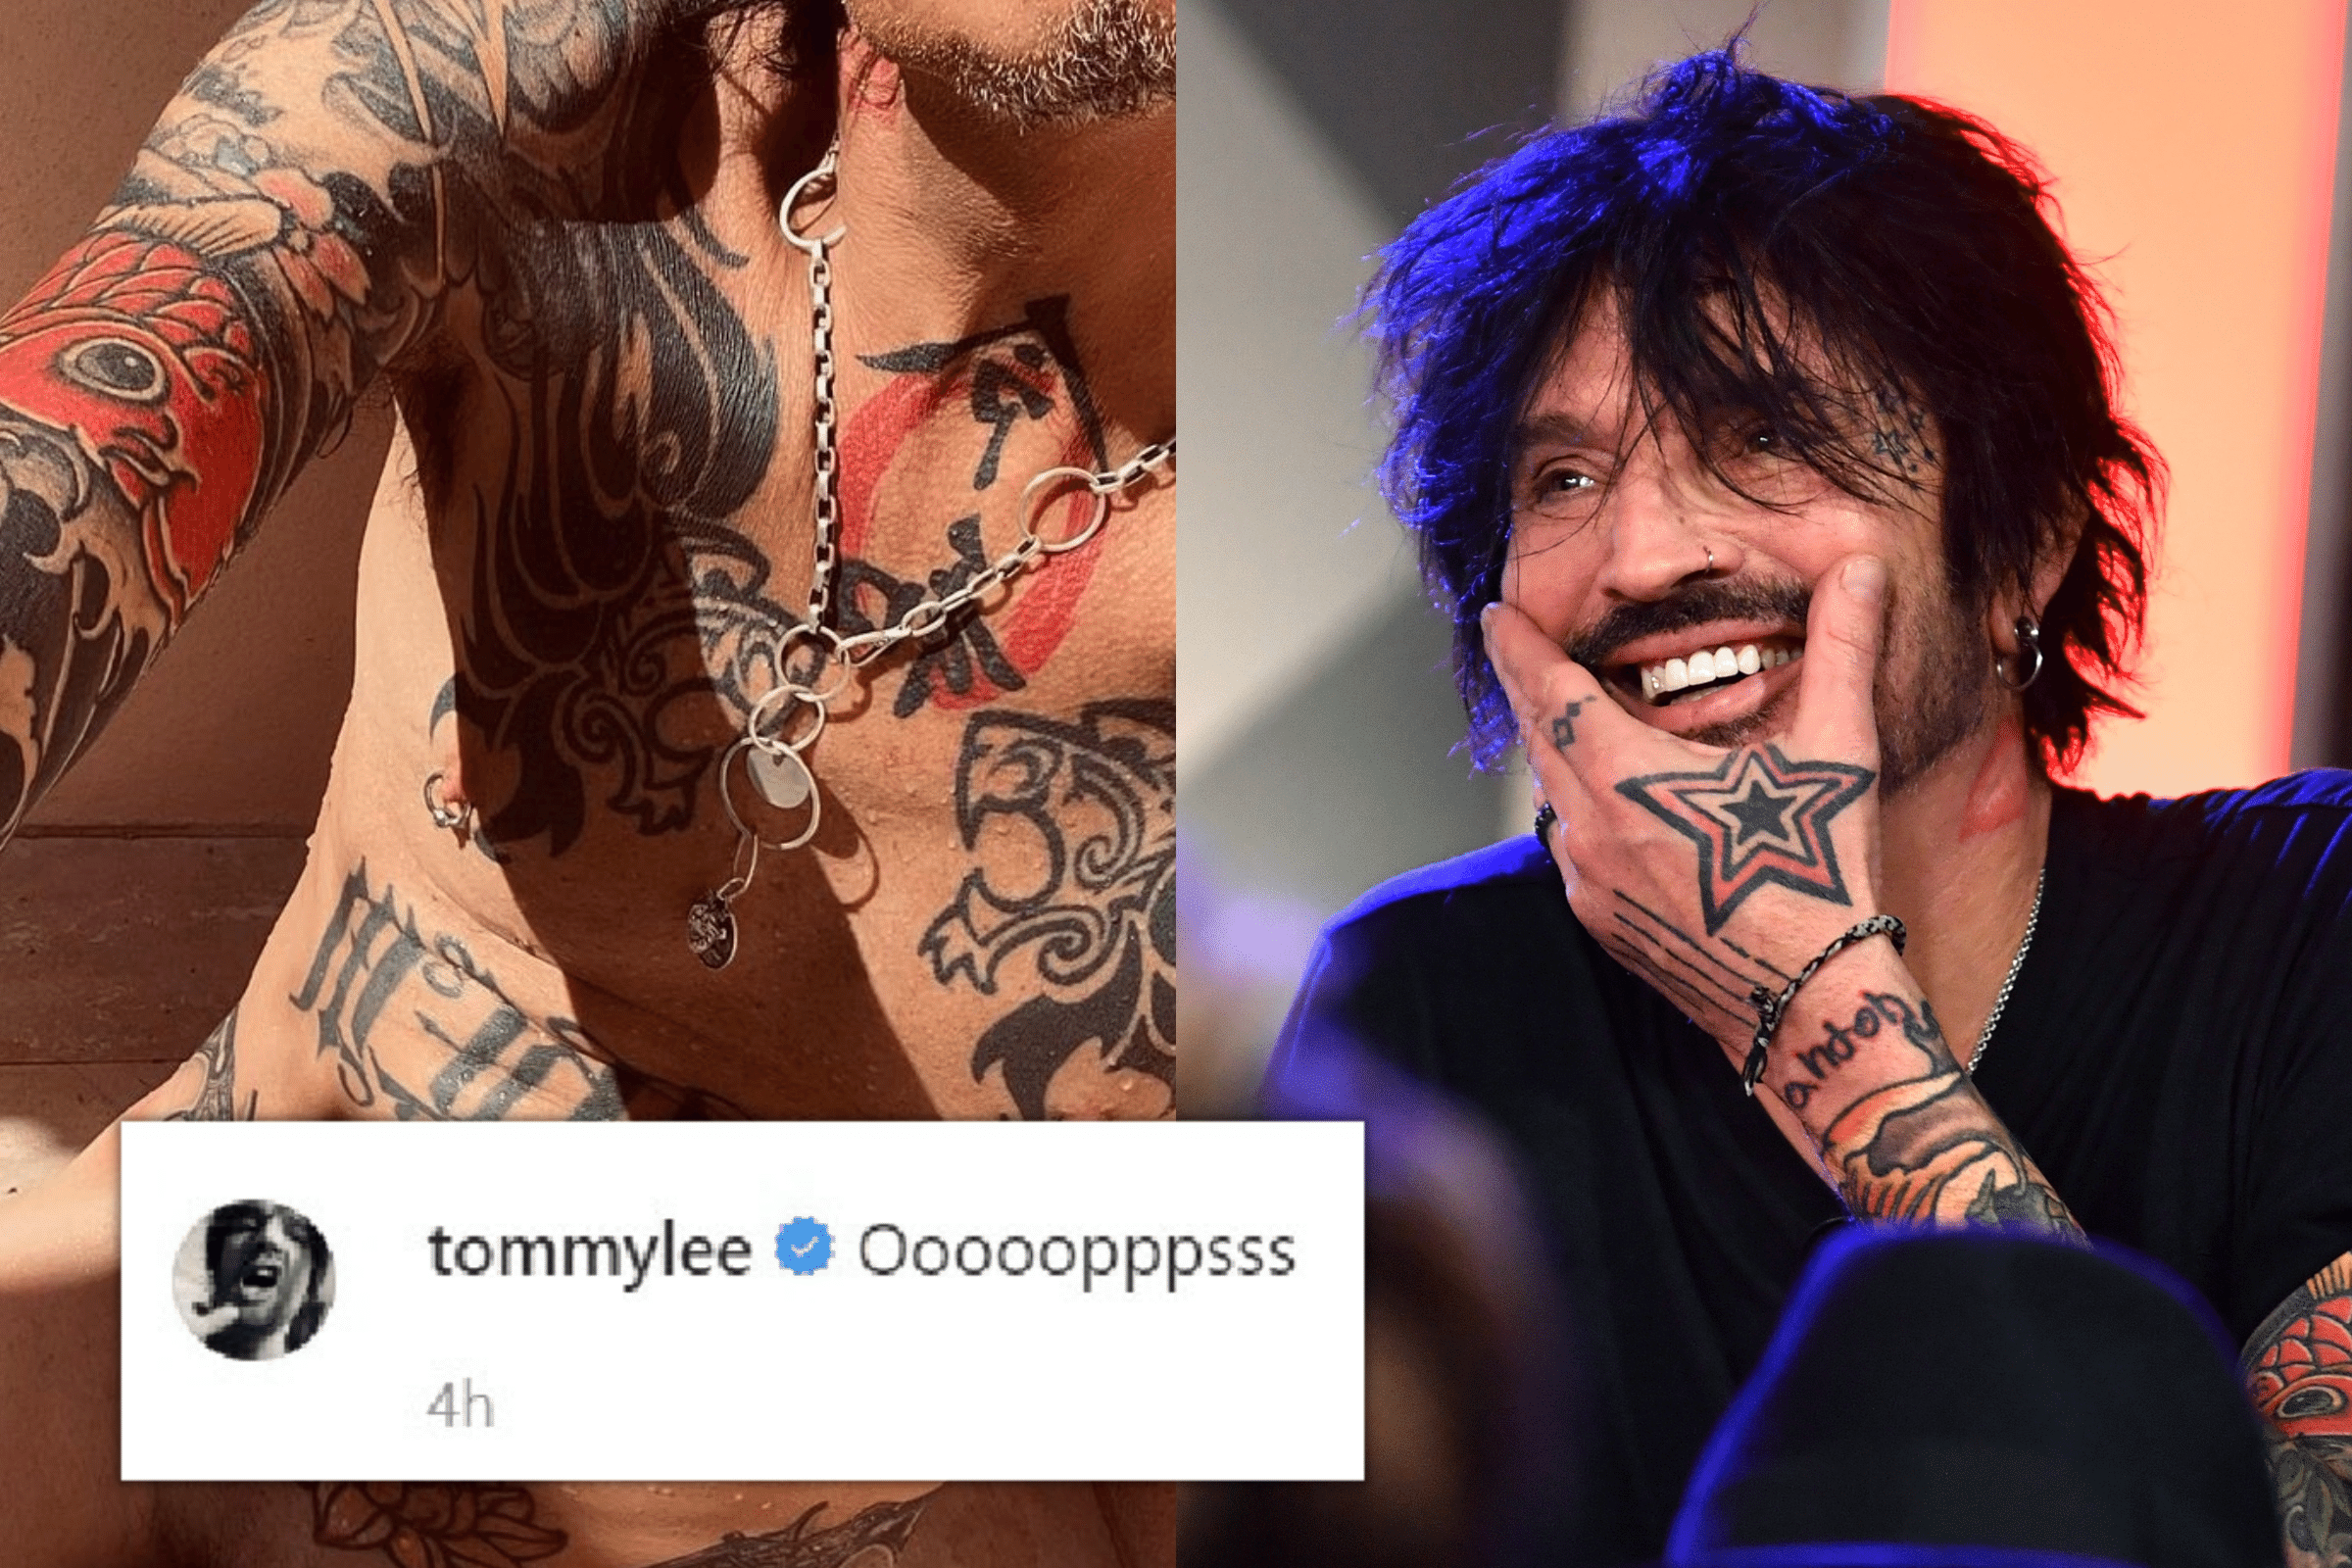 Tommy lee dick pic on instagram